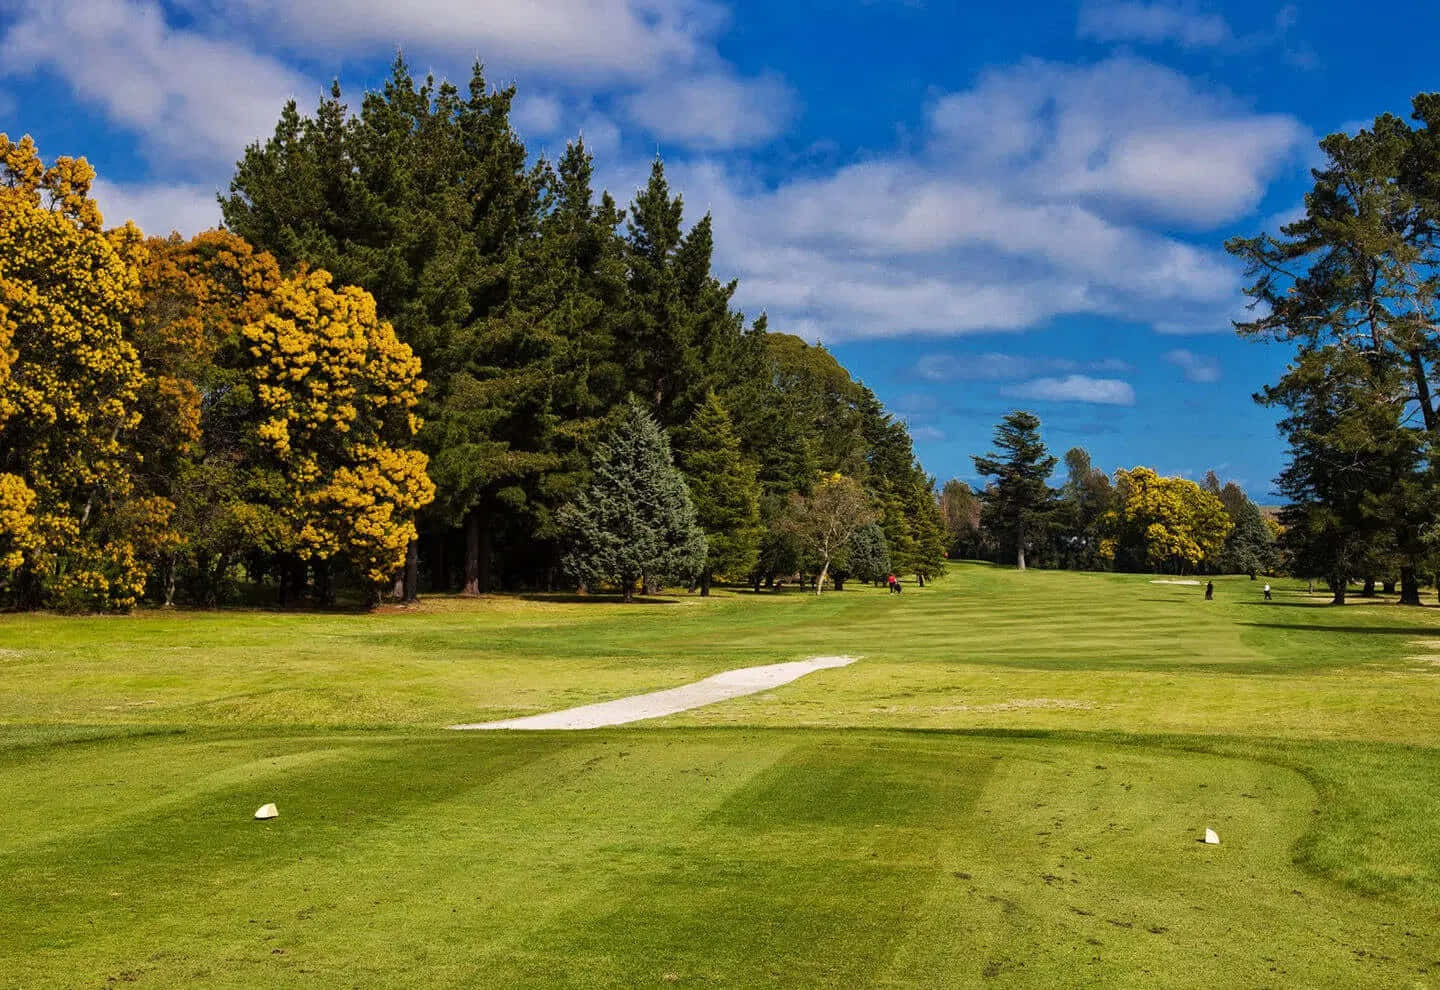 Sunny Golf Course Hastings New Zealand Wallpaper